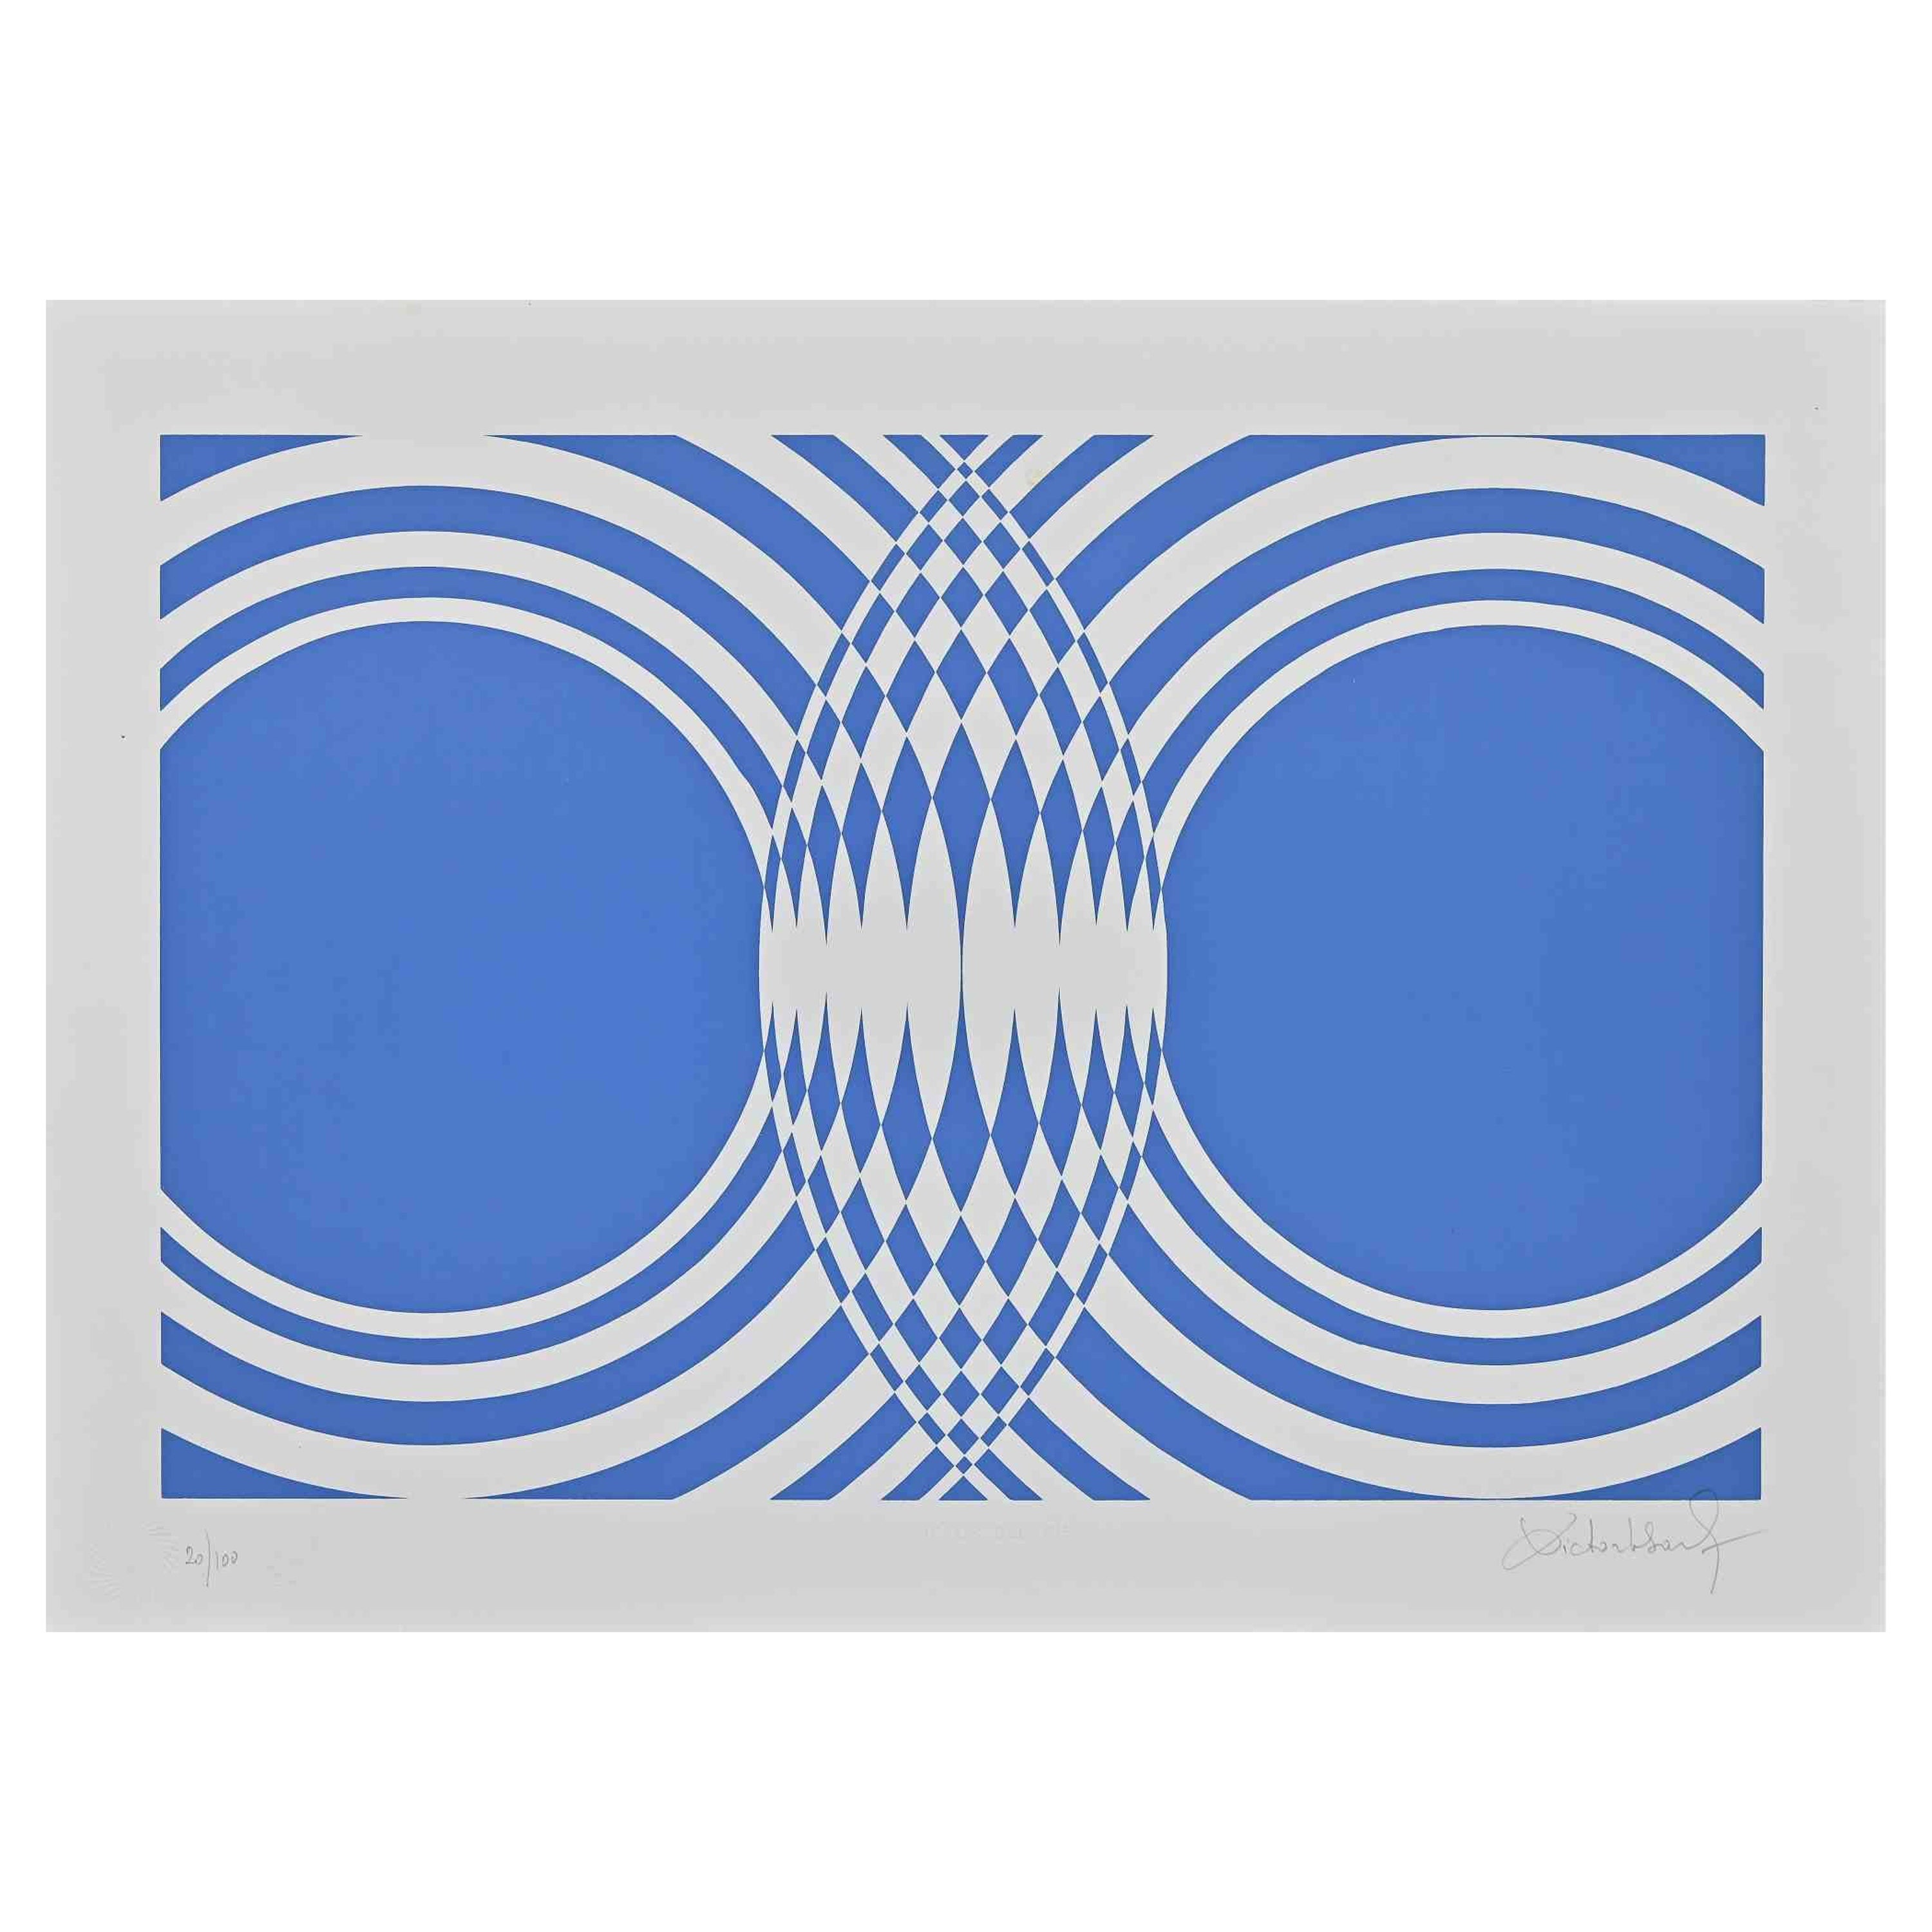 Blue Composition -  Screen Print by Victor Debach - 1970s